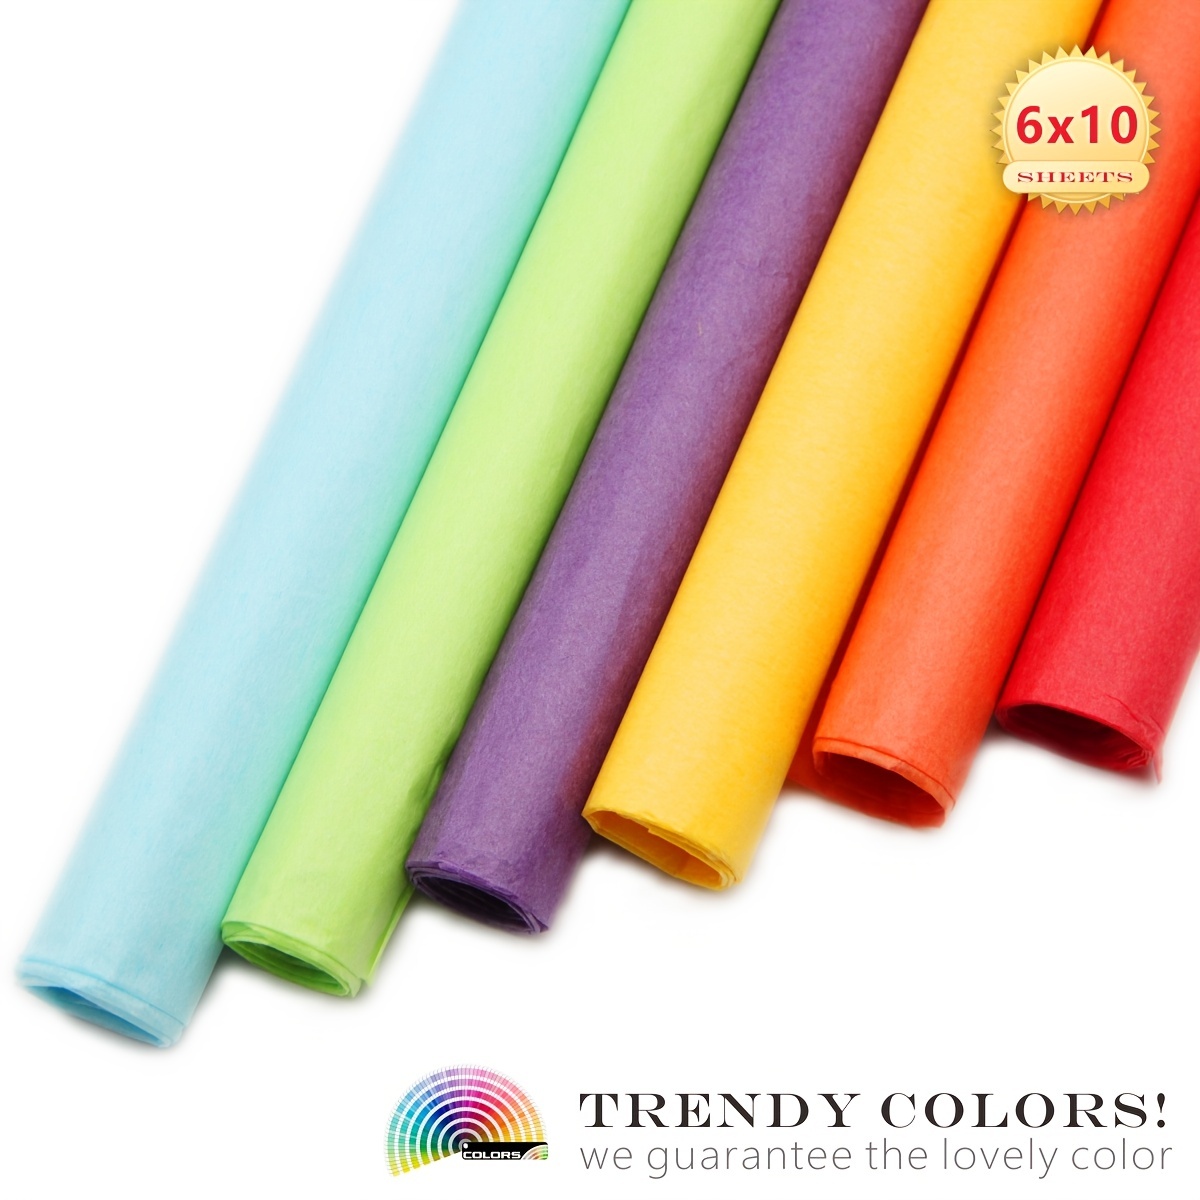 Kraft Wrapping Tissue Paper and Solid Color Tissue